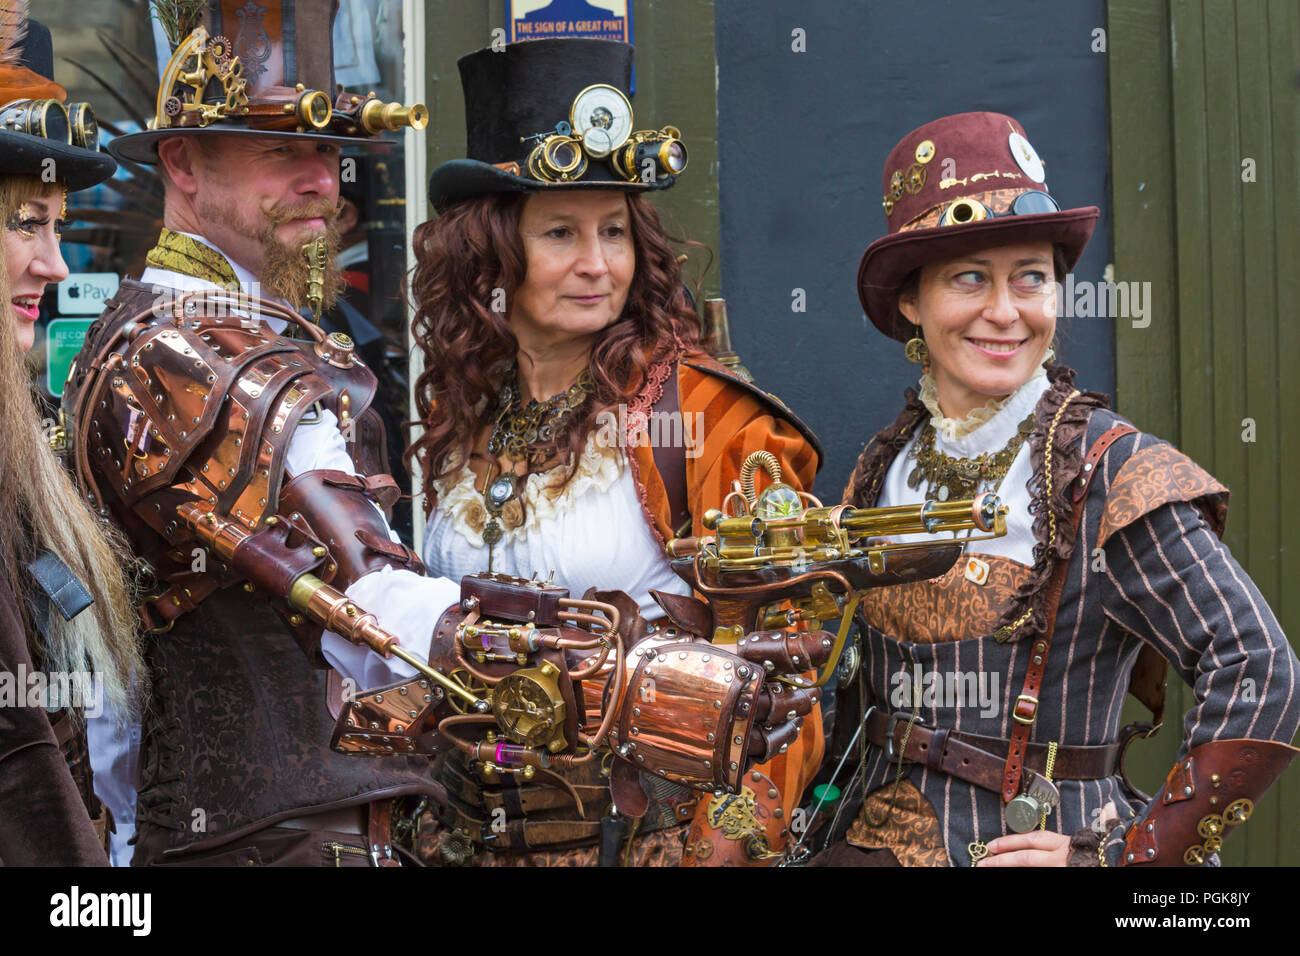 Lincoln, UK. 27th Aug 2018. The Asylum Steampunk Festival at Lincoln, in its 10th year, attracts visitors from all over the world. The biggest and longest steampunk festival in Europe, celebrates a steam powered world in the late 19th century, dressing in Victorian style with accessories that look like parts of machinery, cogs and gears. Credit: Carolyn Jenkins/Alamy Live News - Steampunk fashion, Steampunk clothing Stock Photo